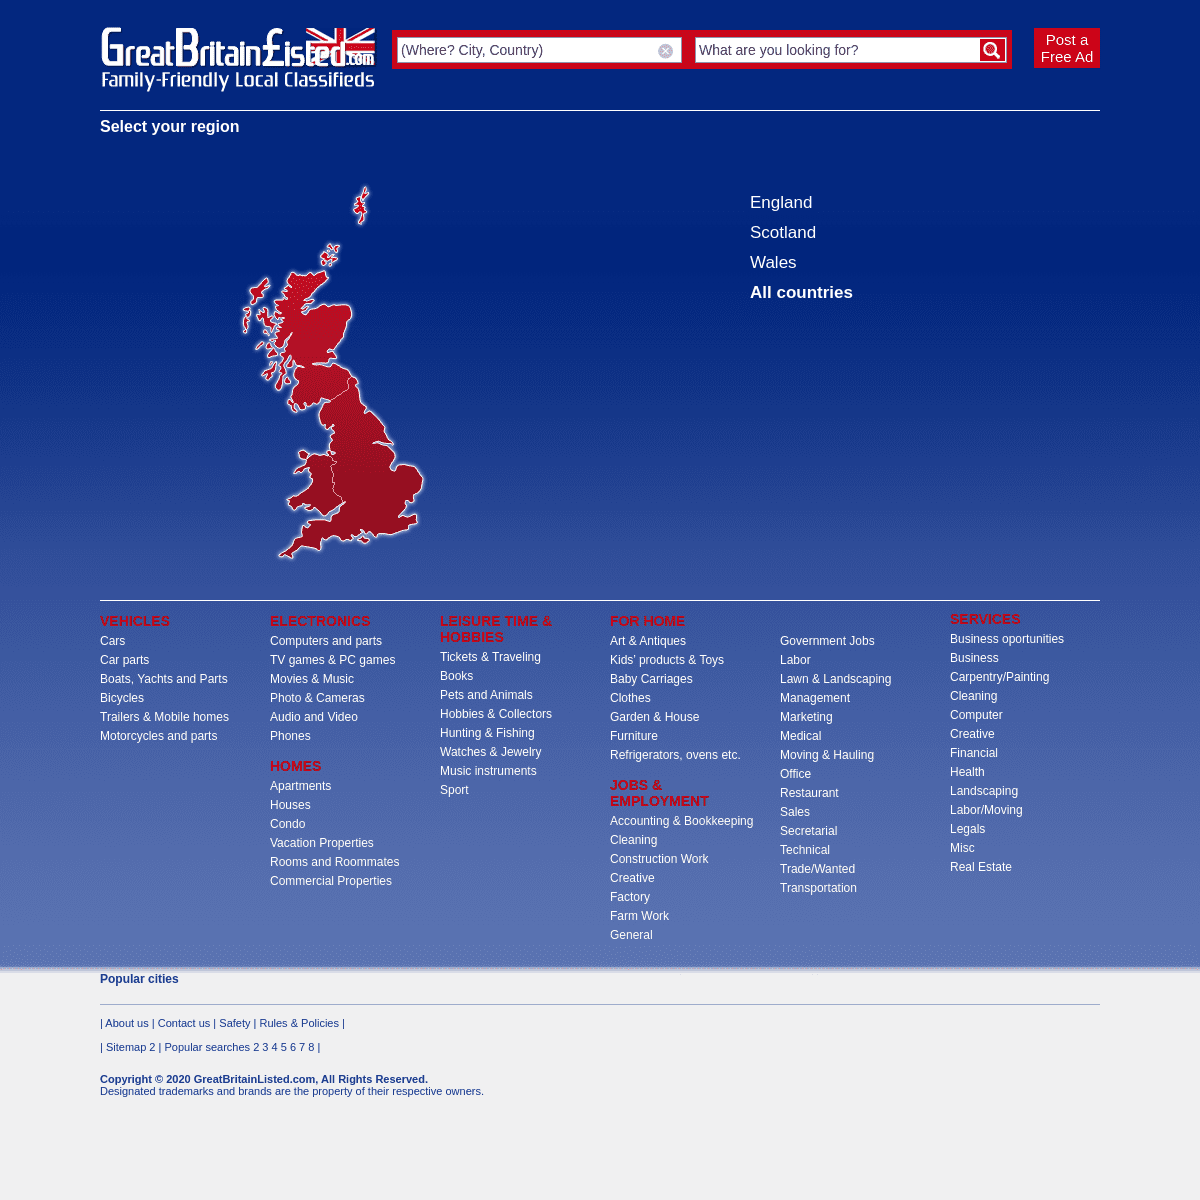 A complete backup of greatbritainlisted.com